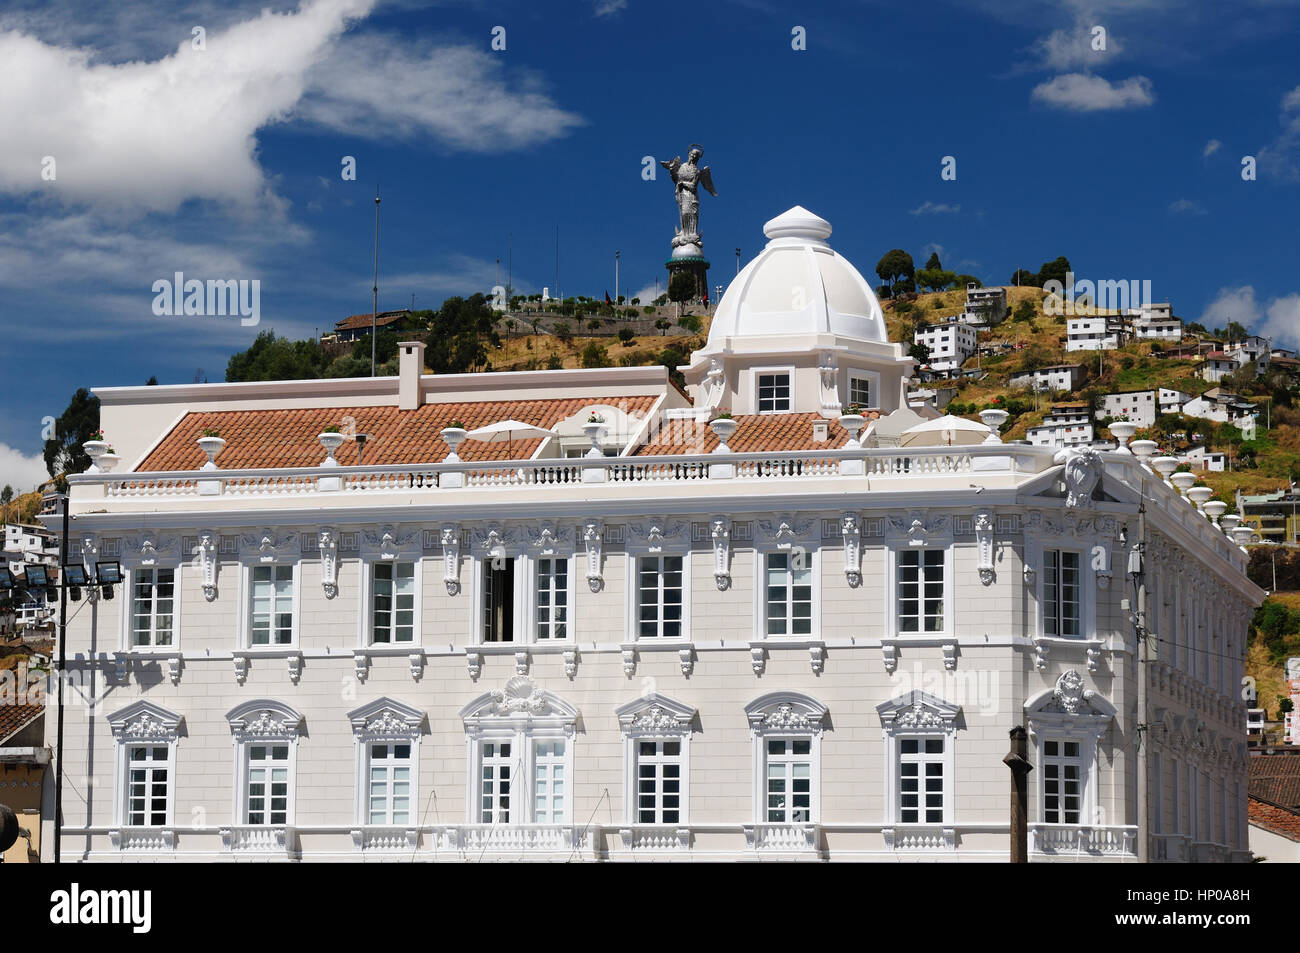 Quito - the capital of Ecuador. Quito is a beautifllly set city, packed with historical monuments and architectural treasures. Cityscape - old town -  Stock Photo